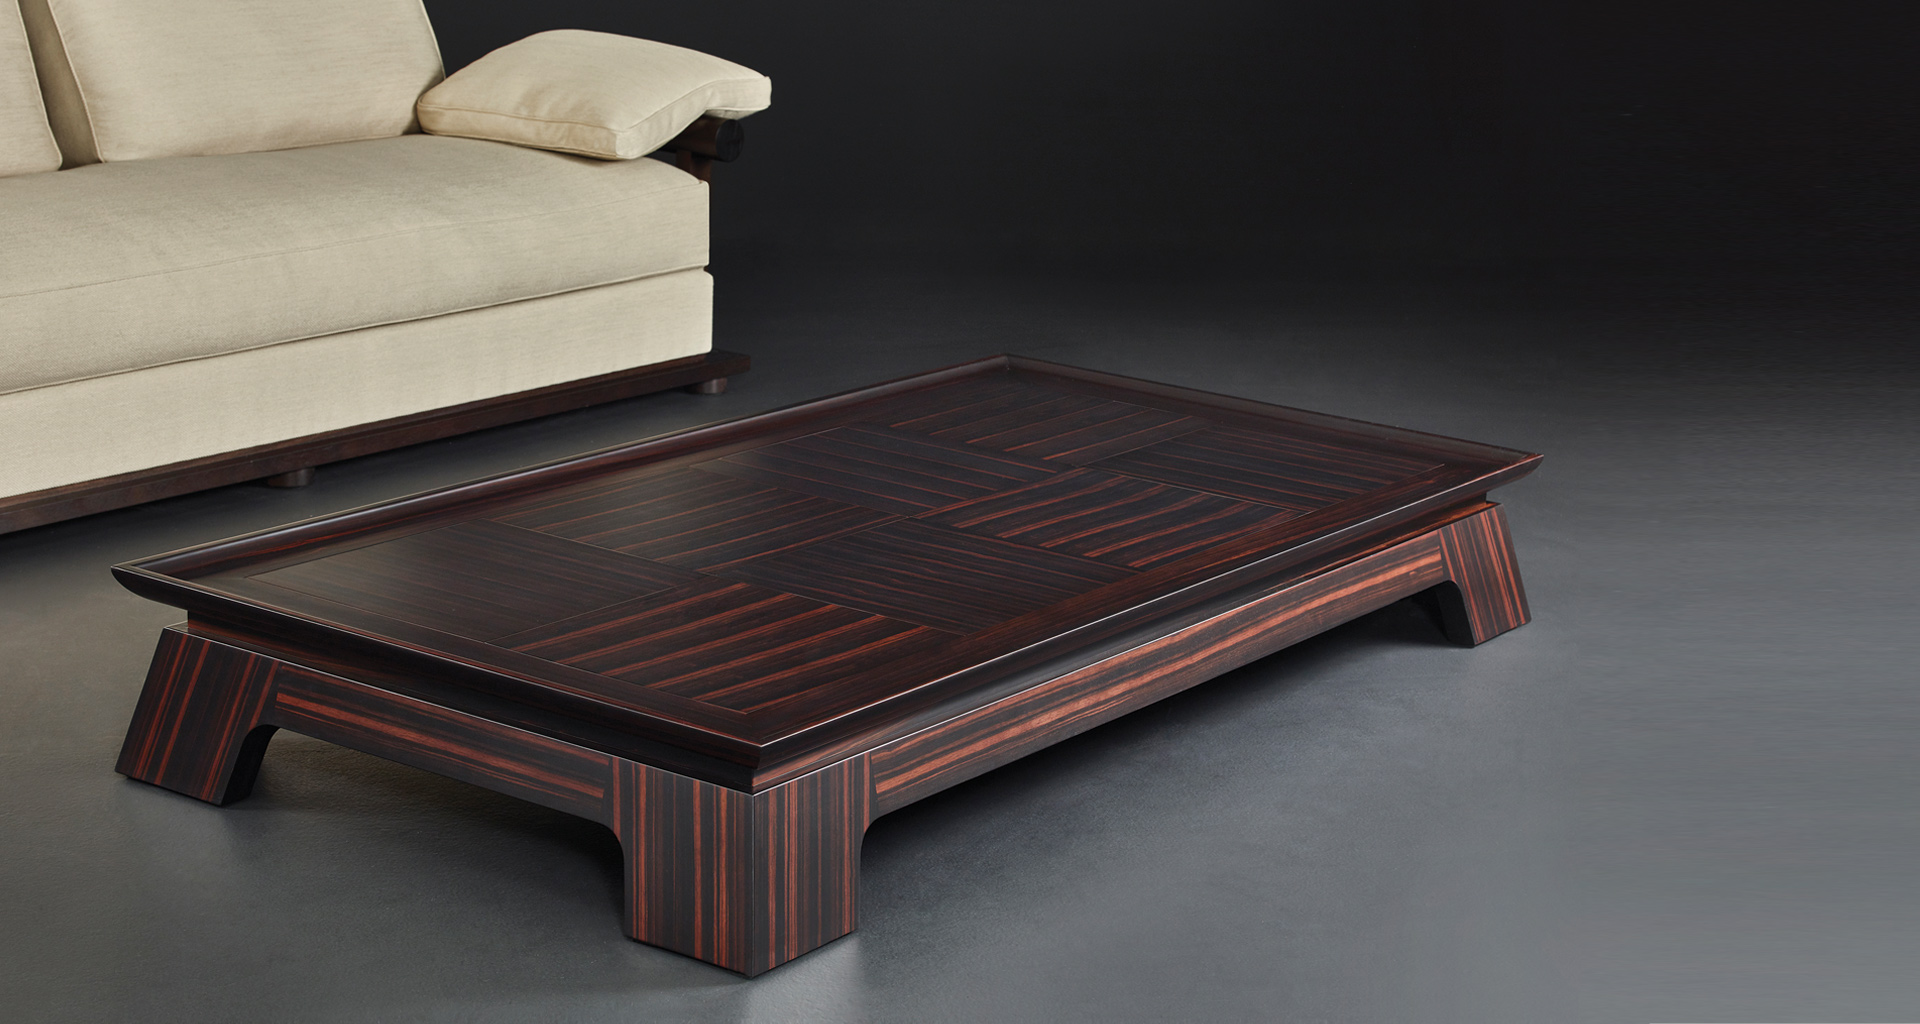 Plenilune is an impressive wooden coffee table available with leather, bronze or marble top interior, from Promemoria's catalogue | Promemoria